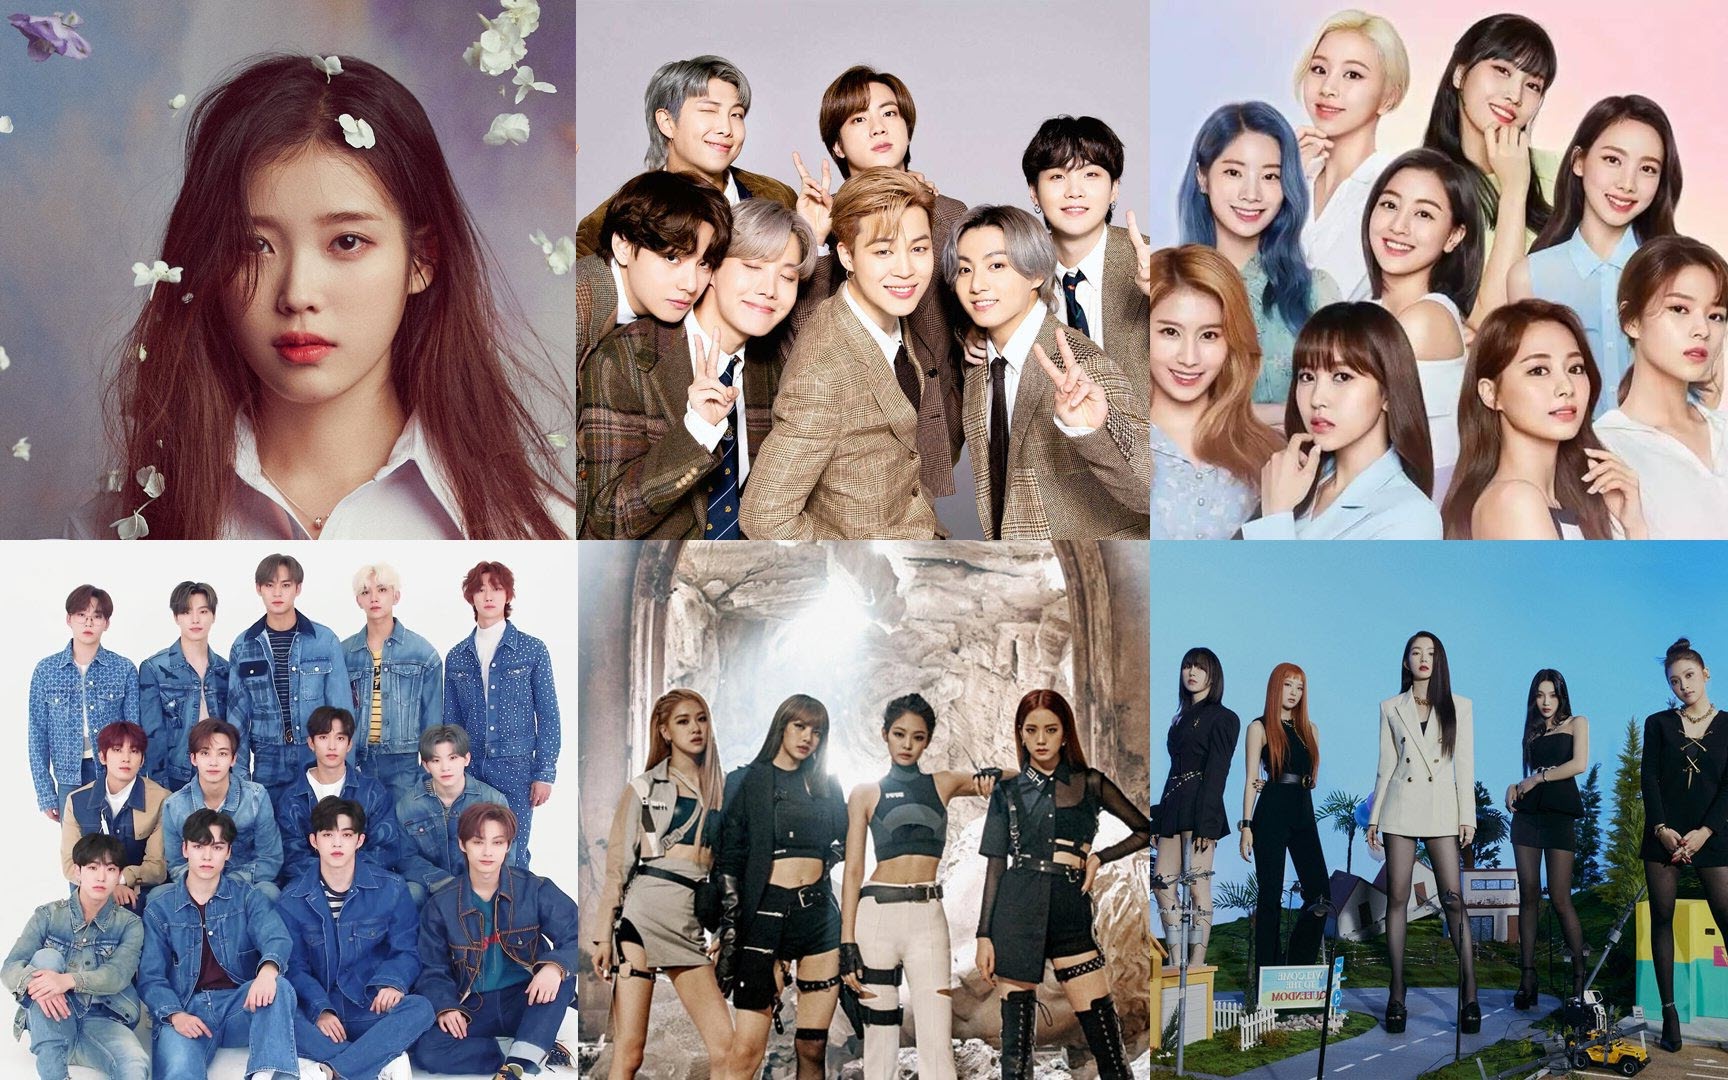 Here Are 8 Viral Trends That K-Pop Idols Popularized, According To